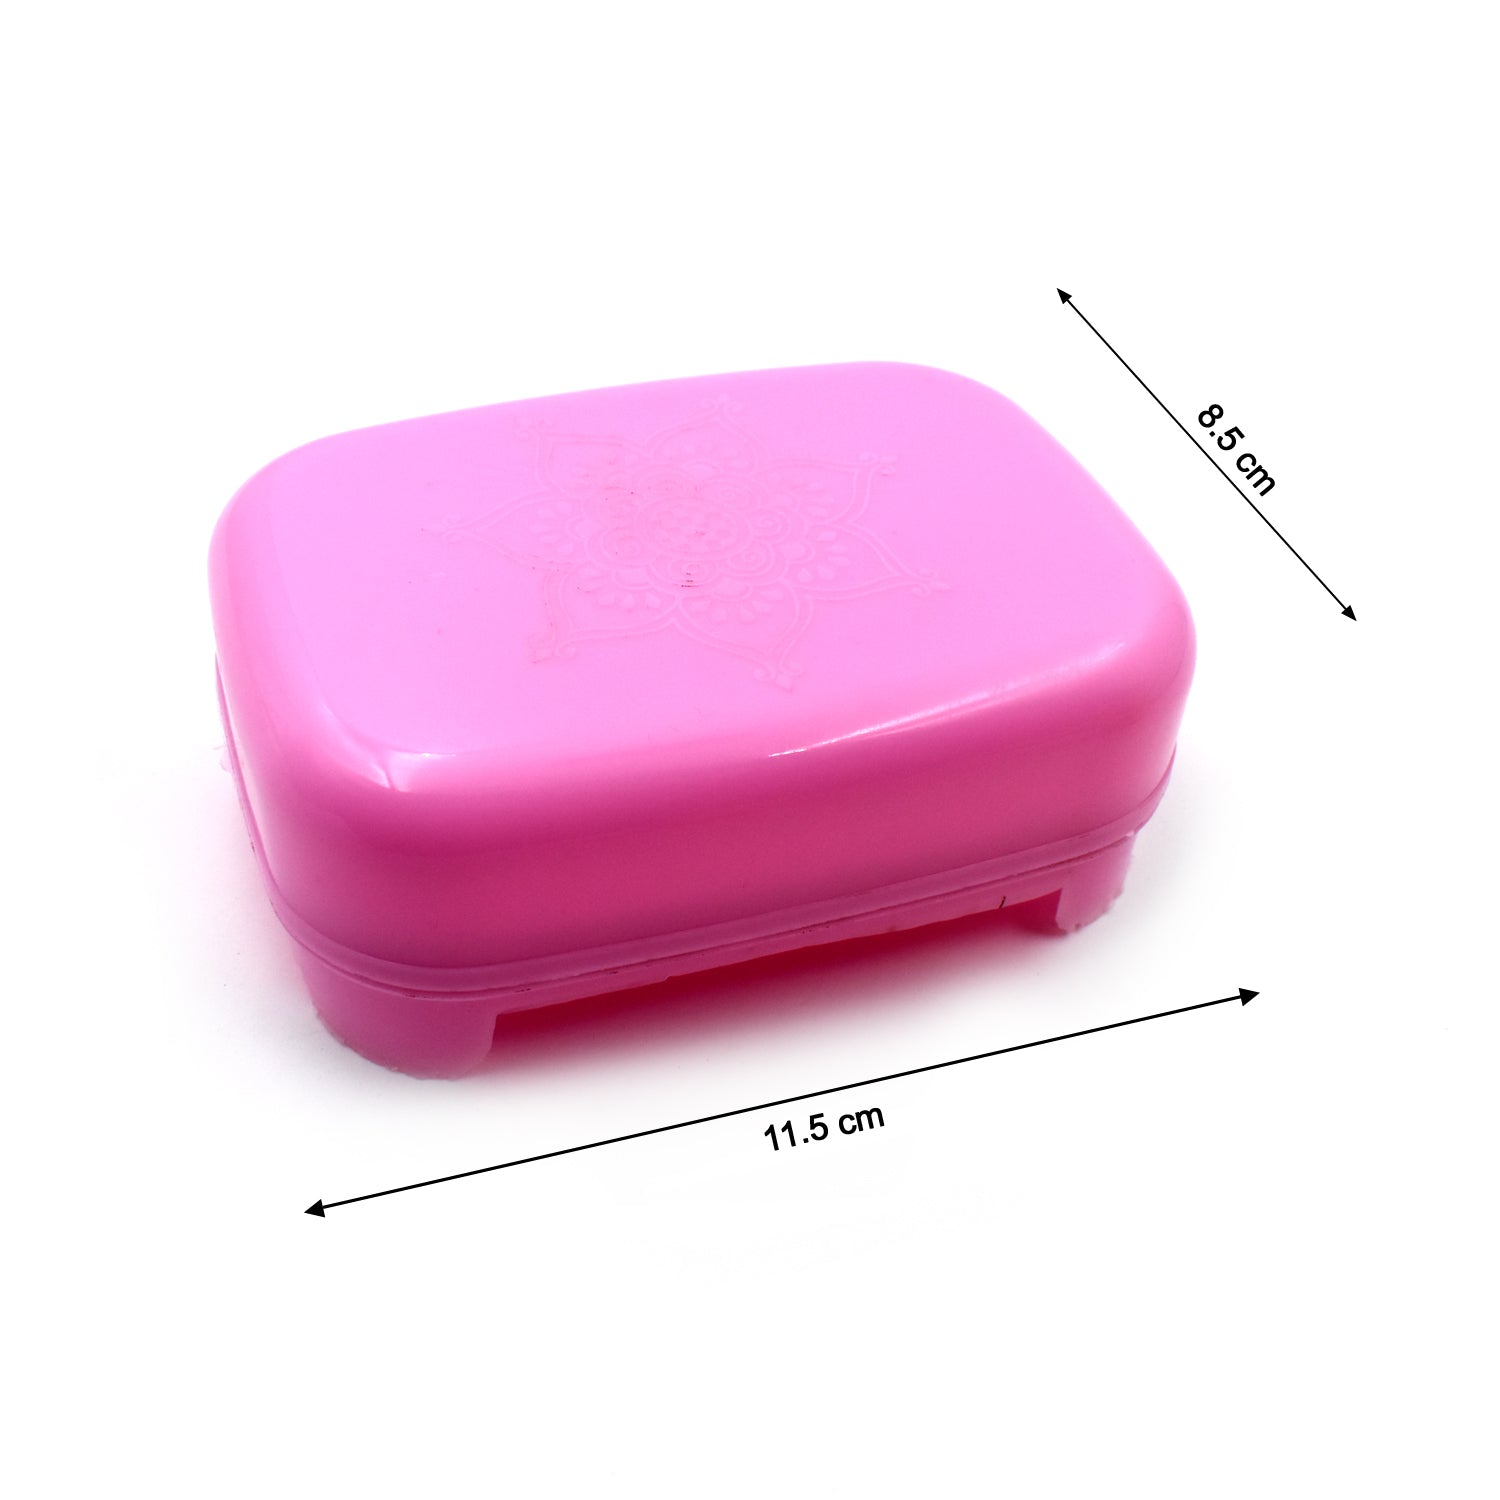 1128A Covered Soap keeping Plastic Case for Bathroom use DeoDap